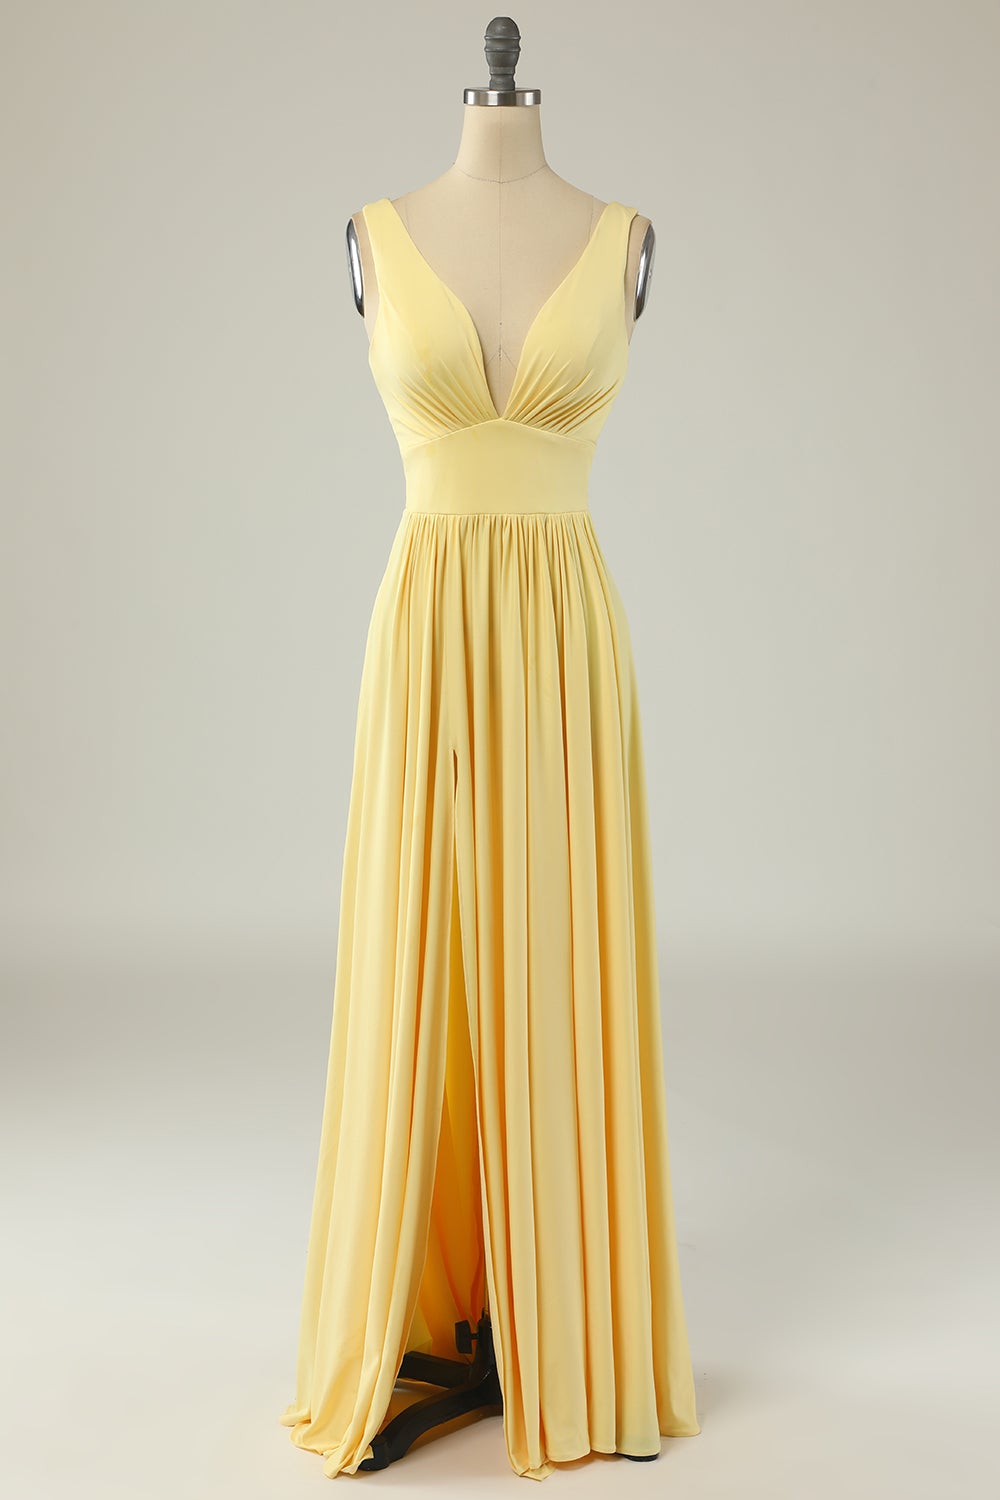 Classic Yellow Long Corset Prom Dress with Split outfit, Prom Dresses Sites